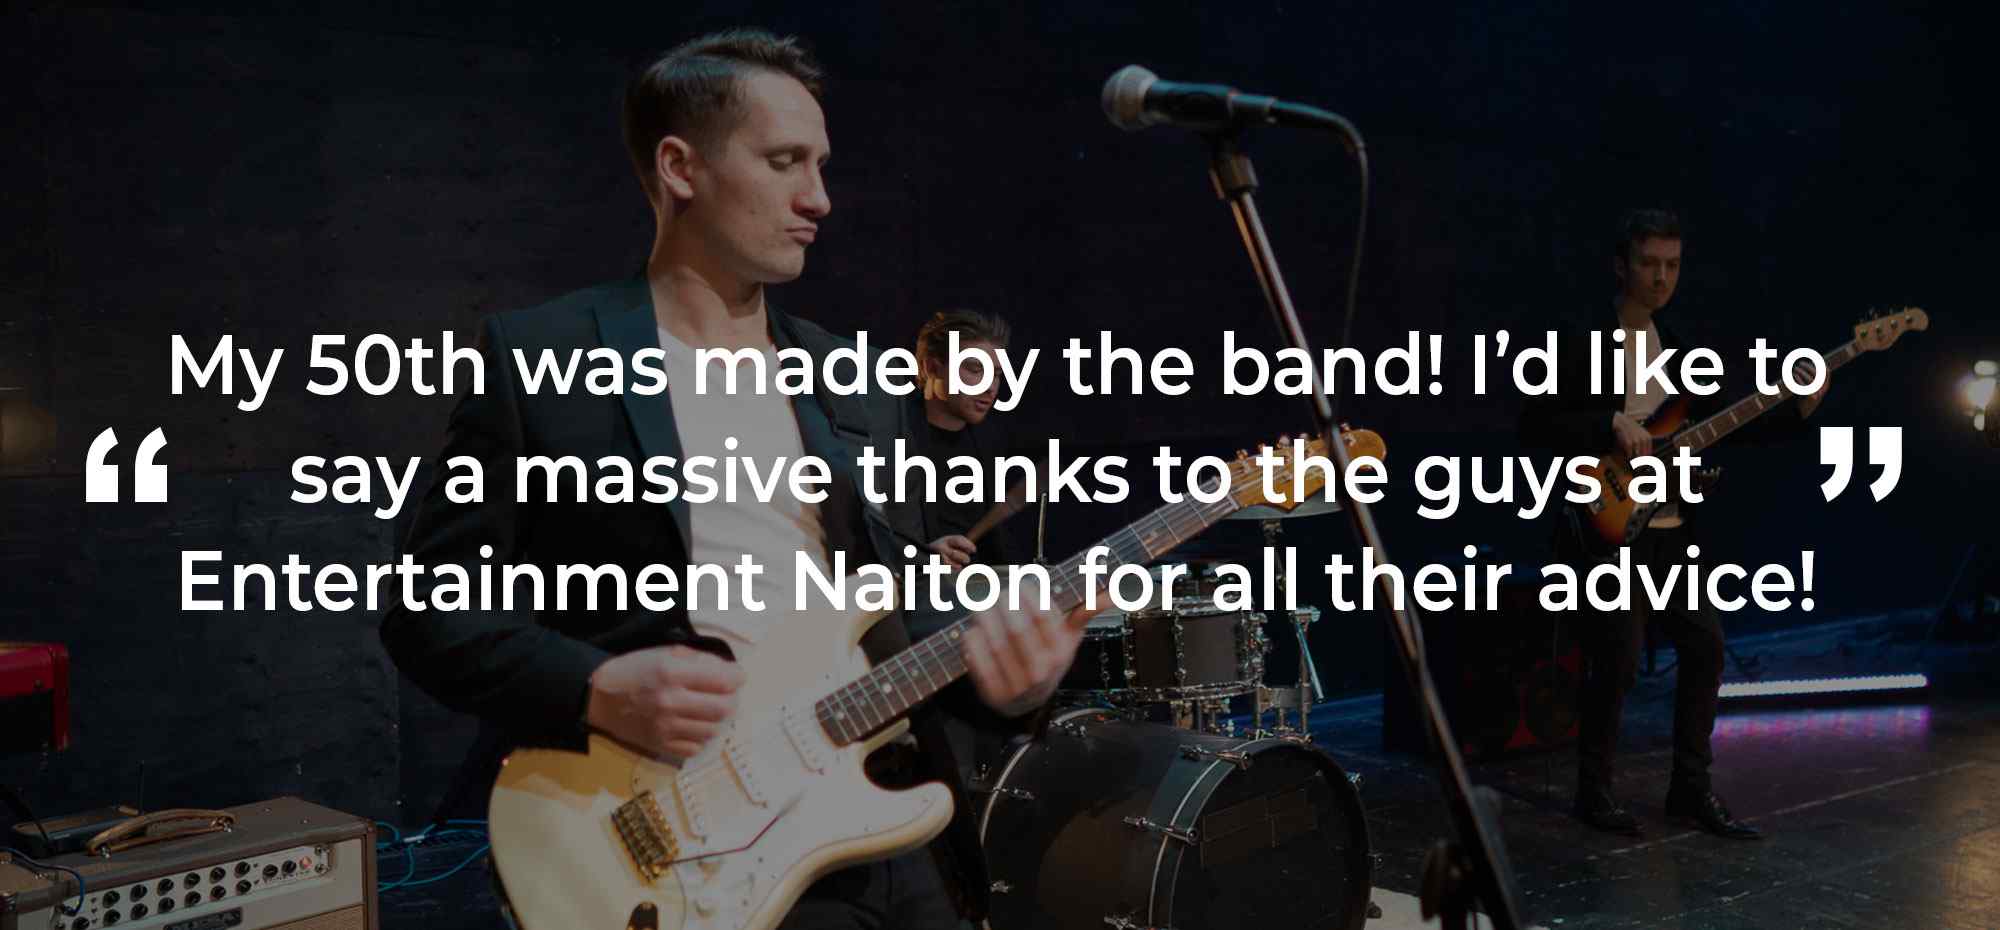 Client Review of a Party Band Dorset